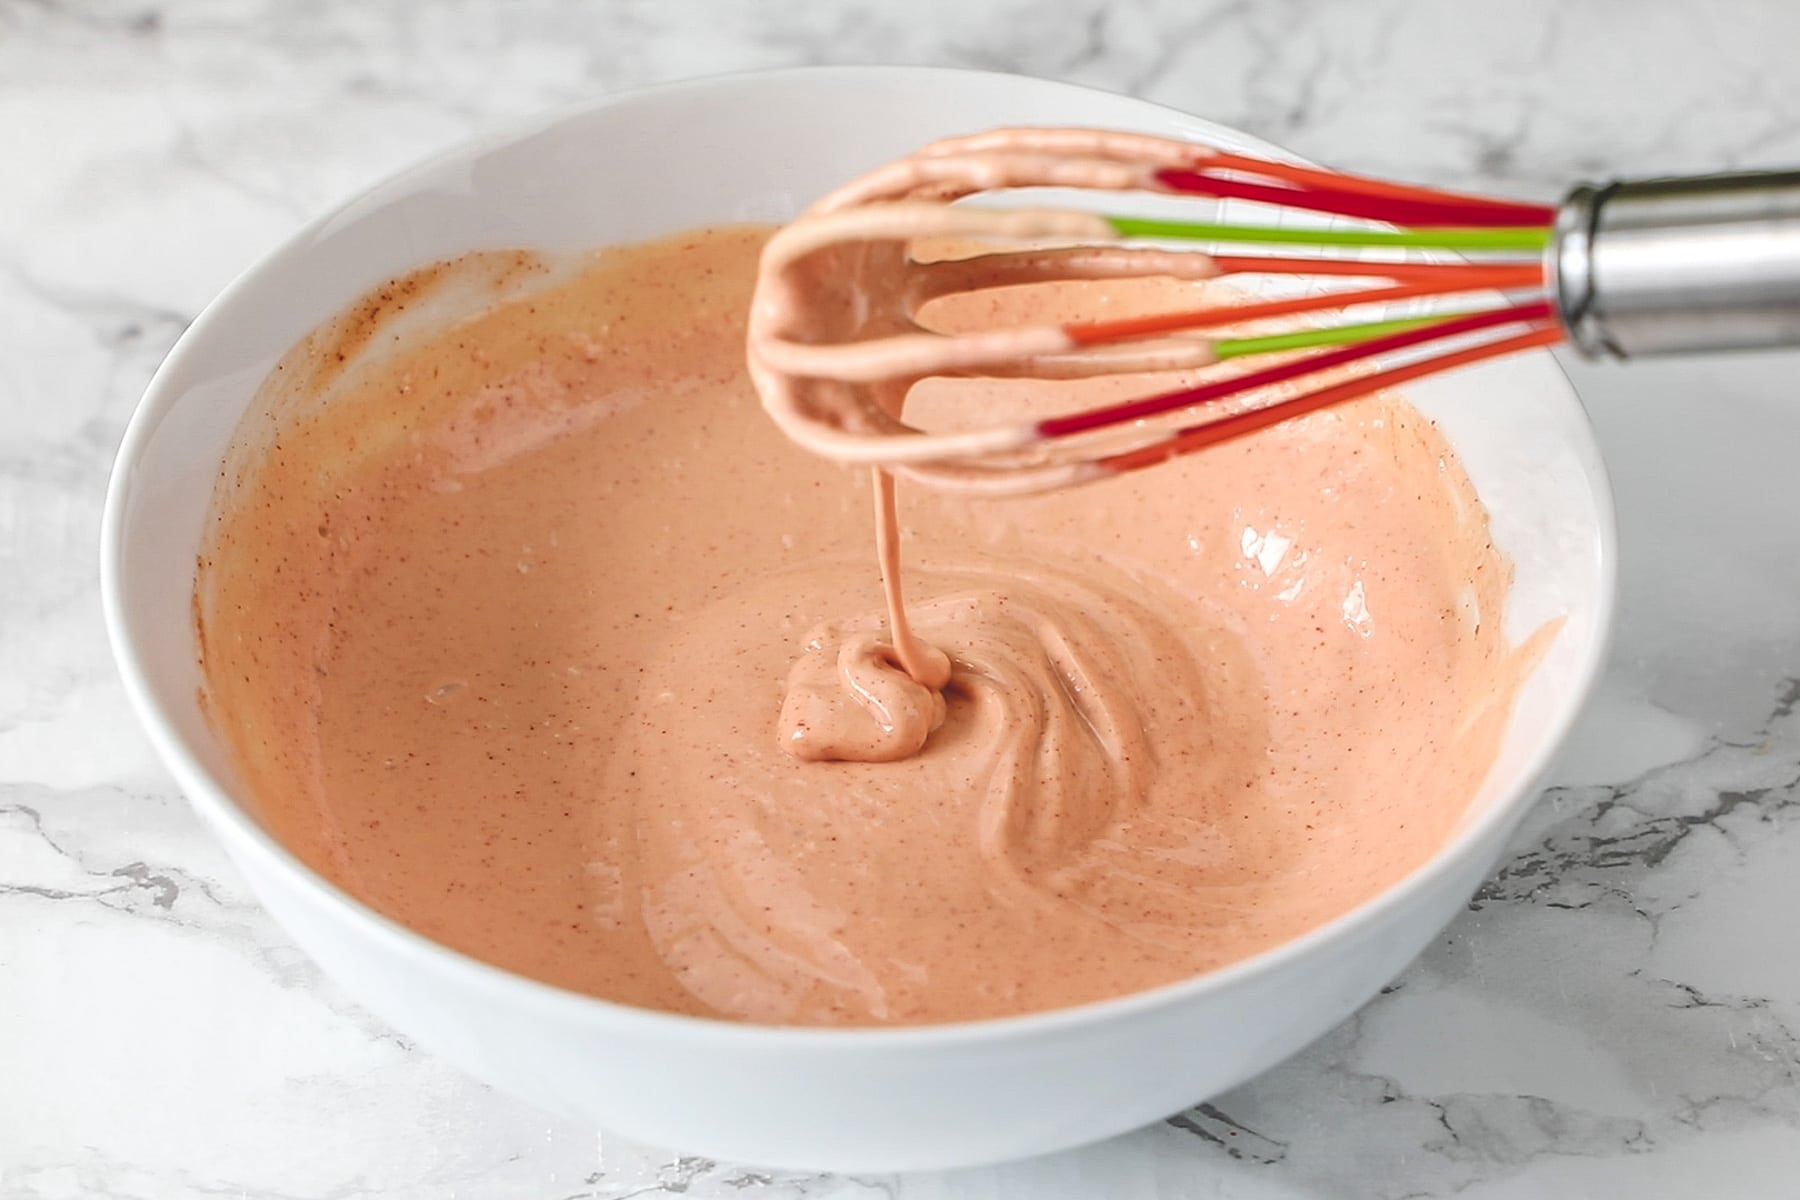 Showing the consistency of fry sauce using whisk.